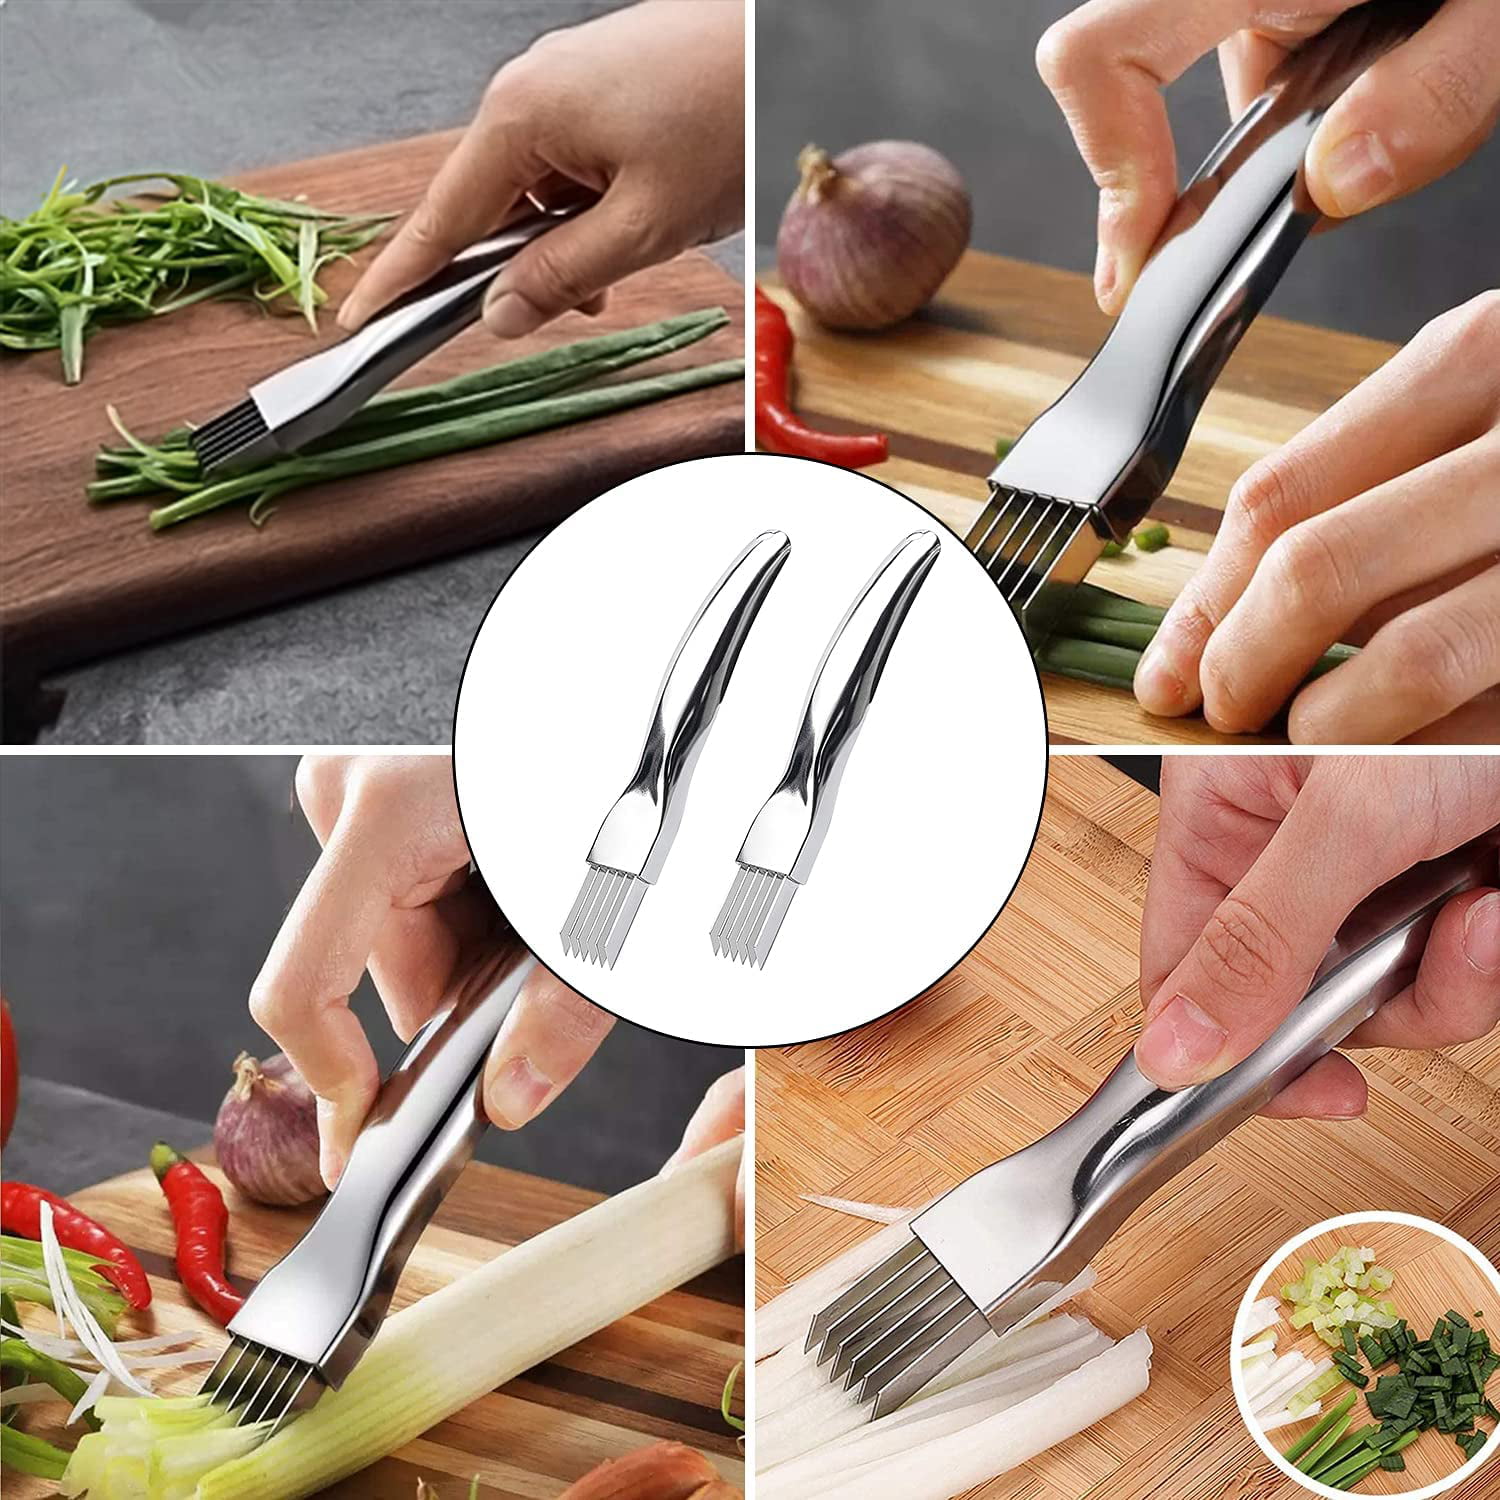 Agatige 2PCS Onion Shredder, Green Onion Knife Stainless Steel Vegetable  Cutter Scallion Cutter Shred Knife Blade Slice Cutlery Kitchen Tool for